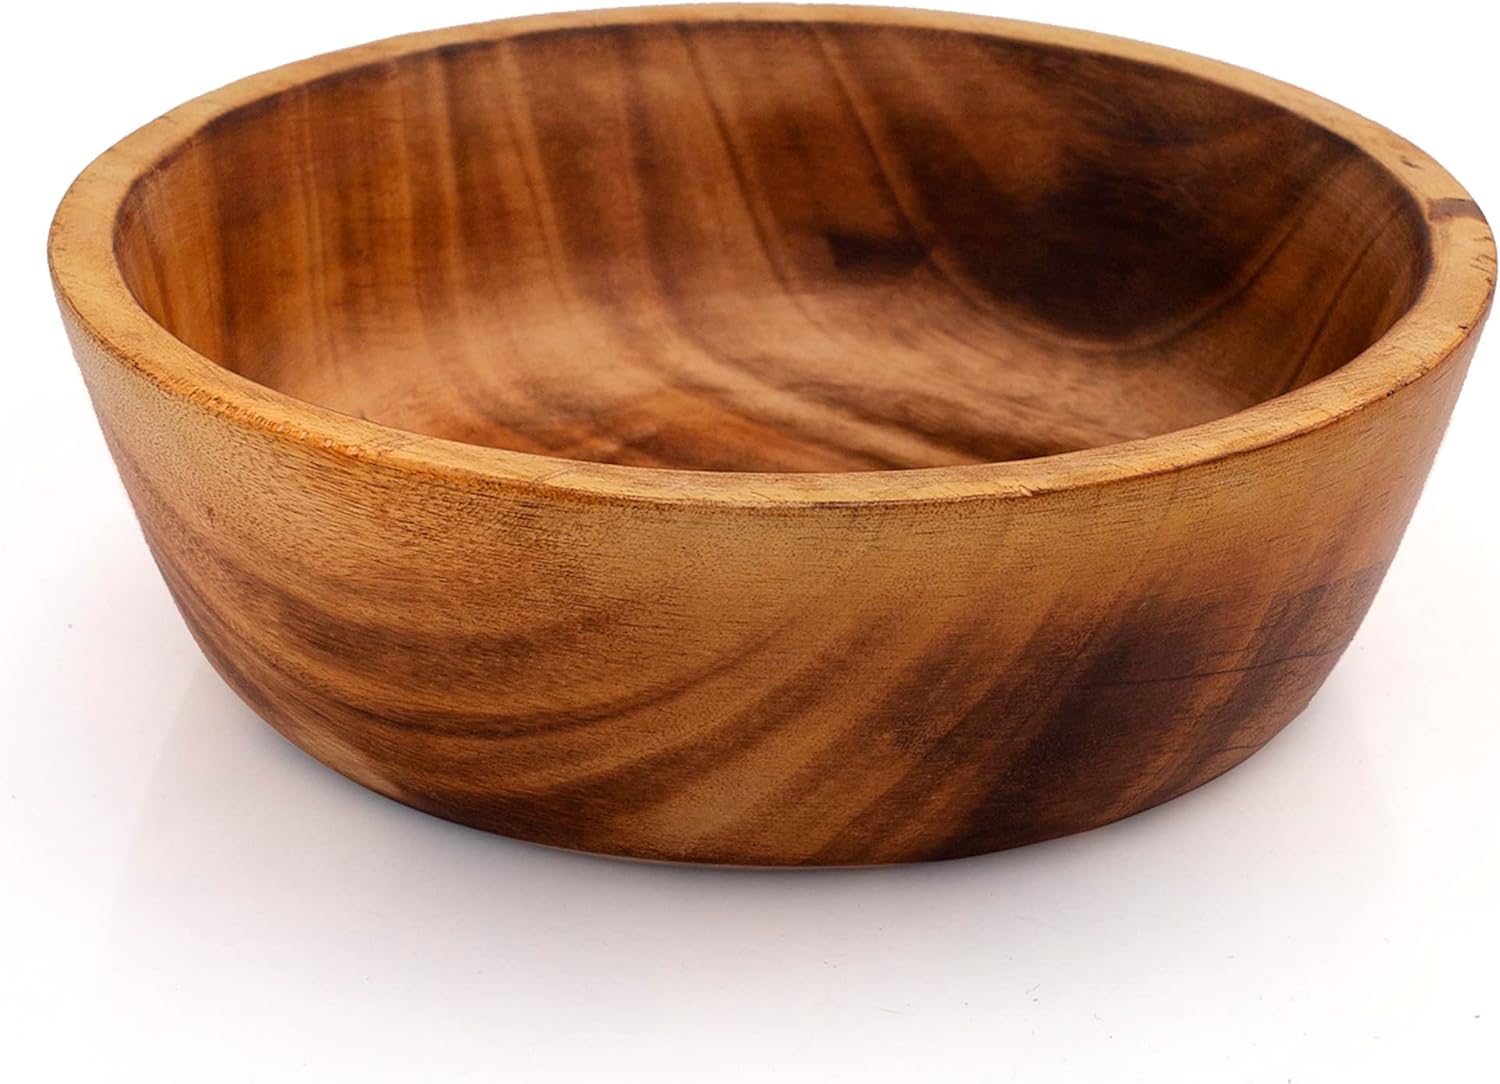 The Great Indian Bazaar Beautiful Handmade 6 x 2 Decorative Mango Wood Snack Serving Bowl For Dry Fruits Chips Coffee Table Countertop Display Key Bowl Tableware Kitchen Room Home Accents